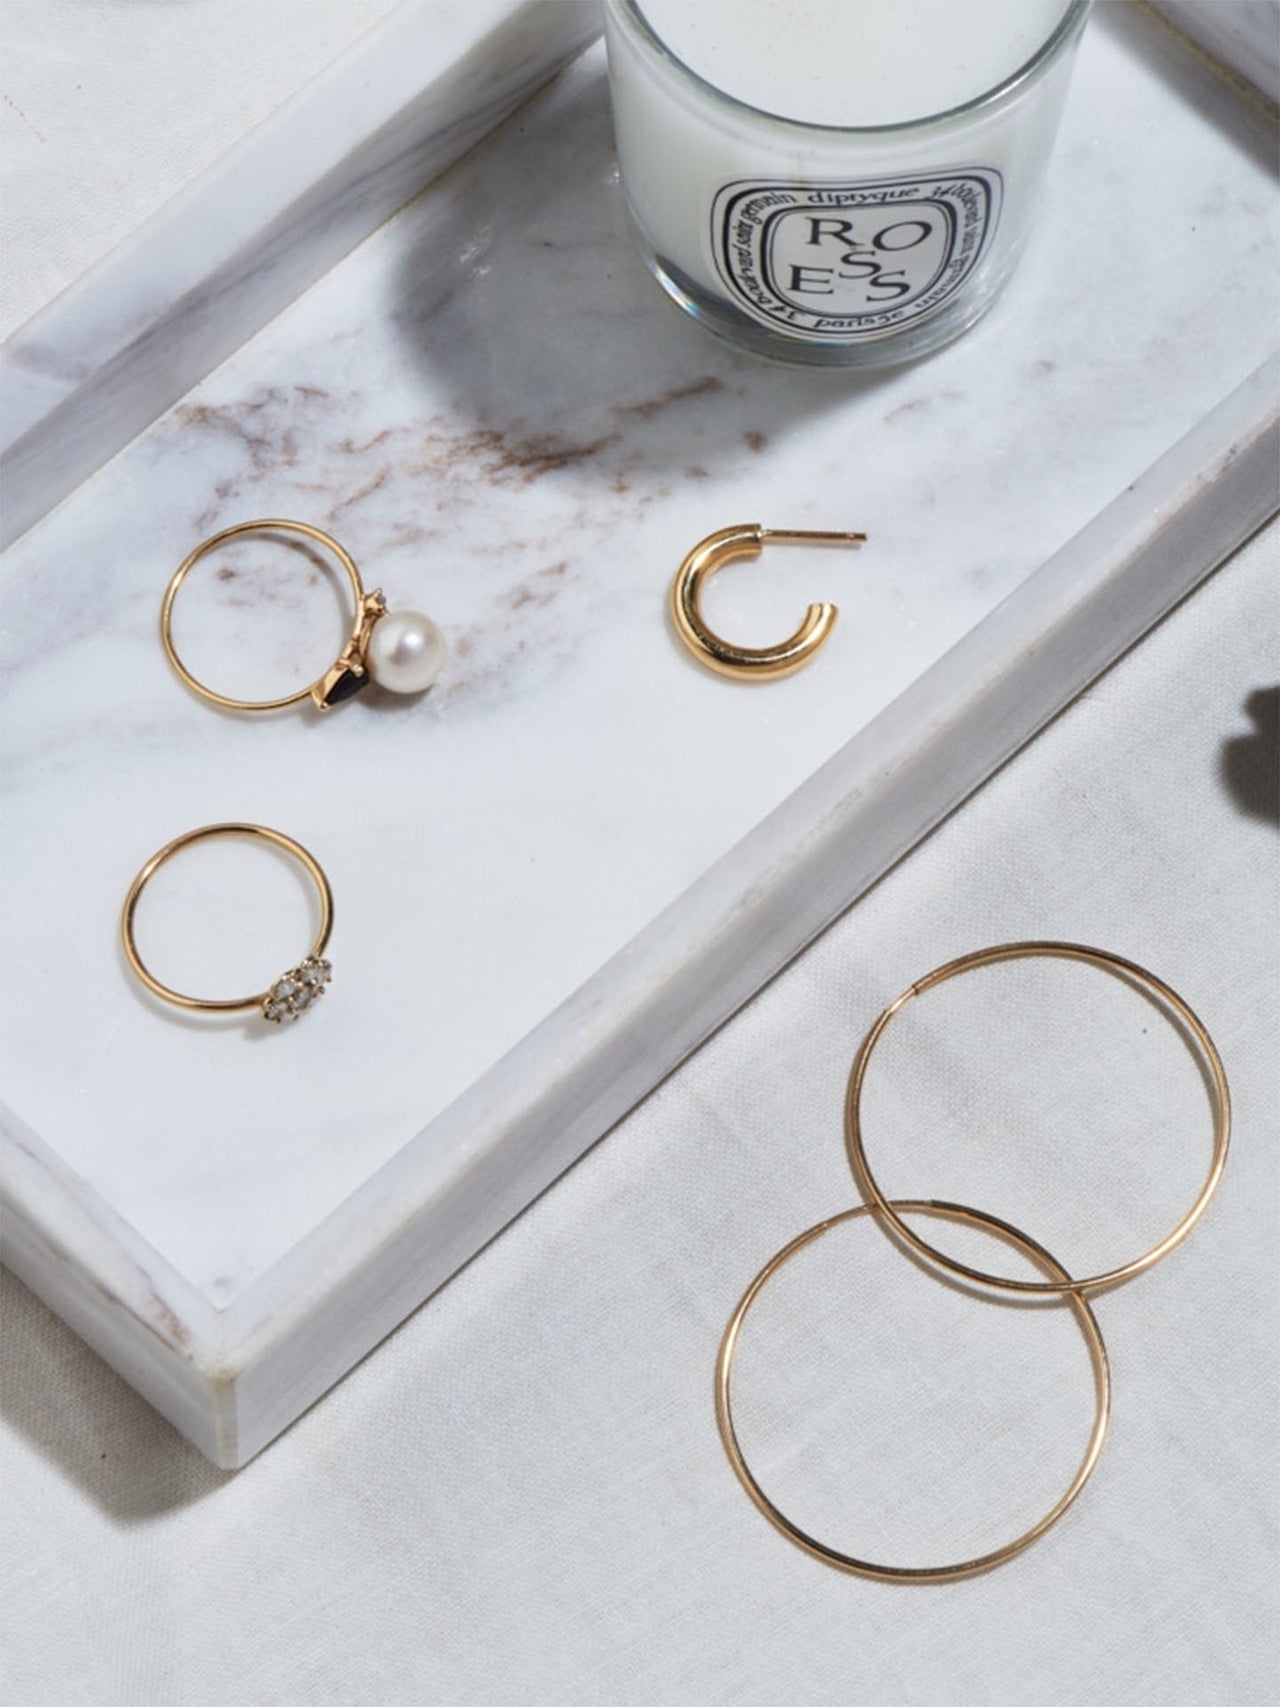 Styled product shot of the Product shot of the Chubbie Huggies (10Kt shinyYellow Gold Mini Tube Hoop Earrings (Diameter: 16.51mm Thickness: 3mm) along with other gold products Background: Marble plate